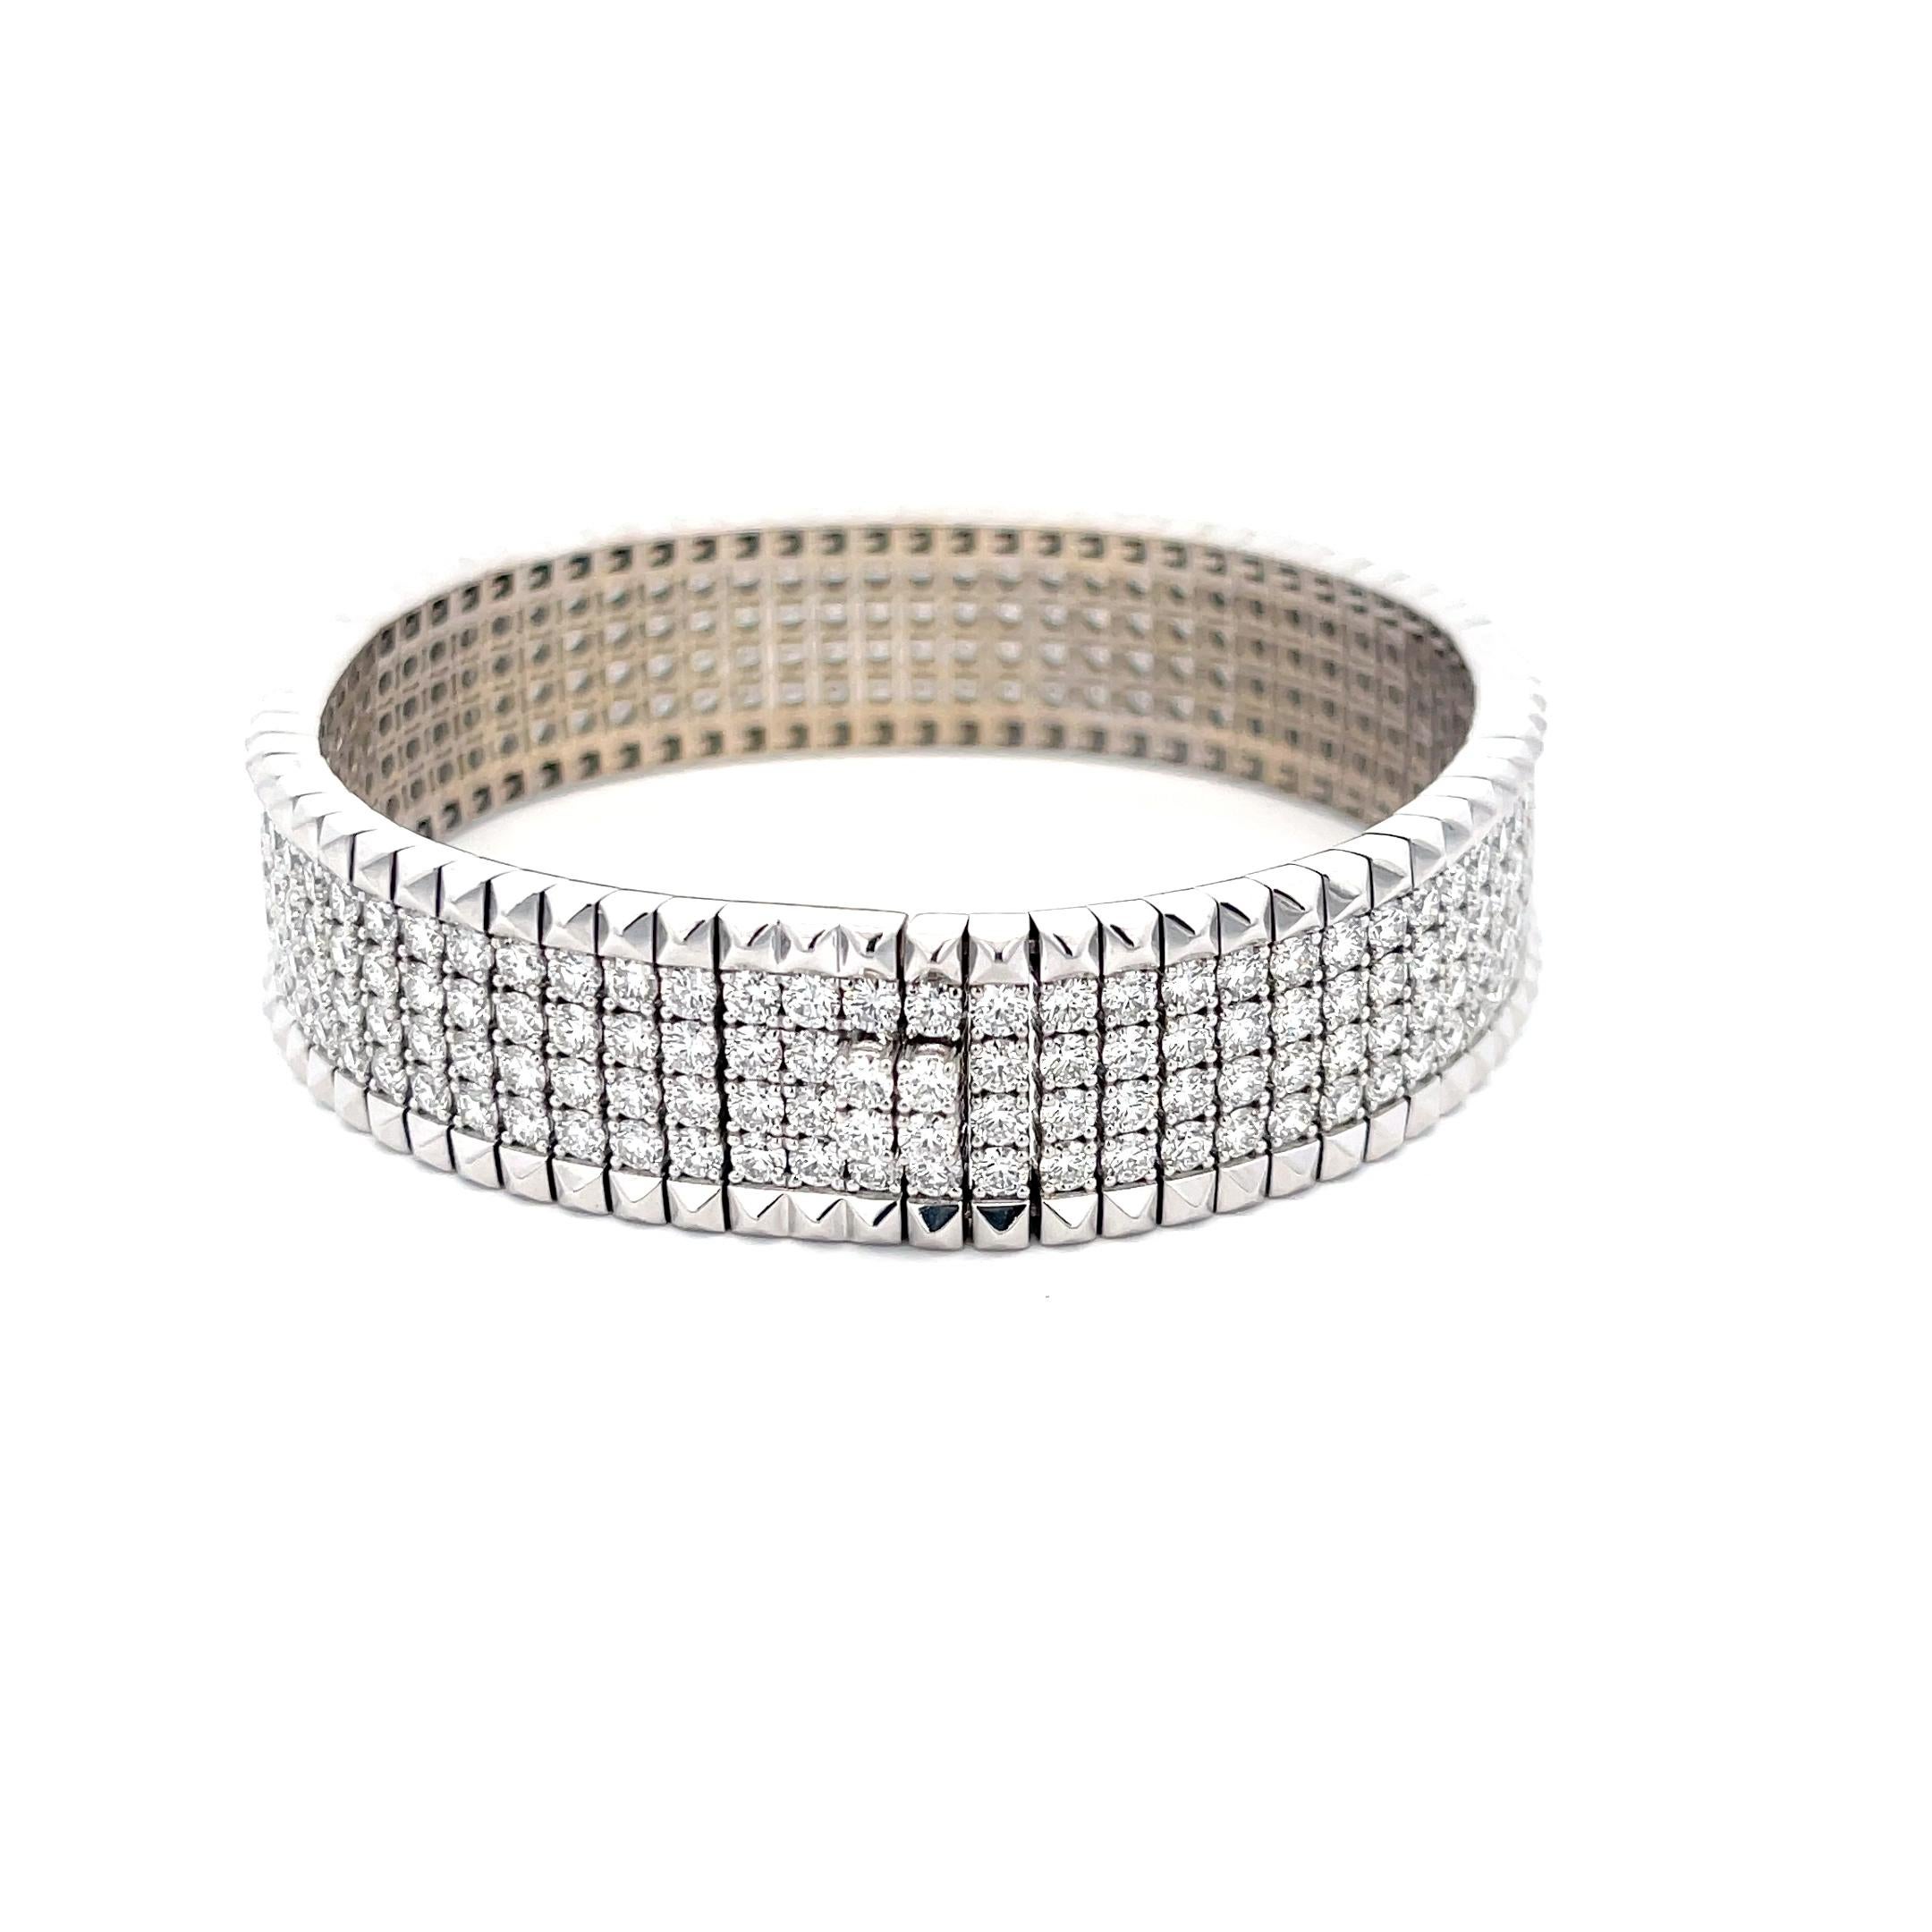 Estate Roberto Coin Bracelet in 18K White Gold from the Rock & Diamonds Collection. The bracelet features a trim of pyramid studs and in the center four rows of pave diamonds with a total weight of 15.35 carats. Normal retail is $69,500!  
7